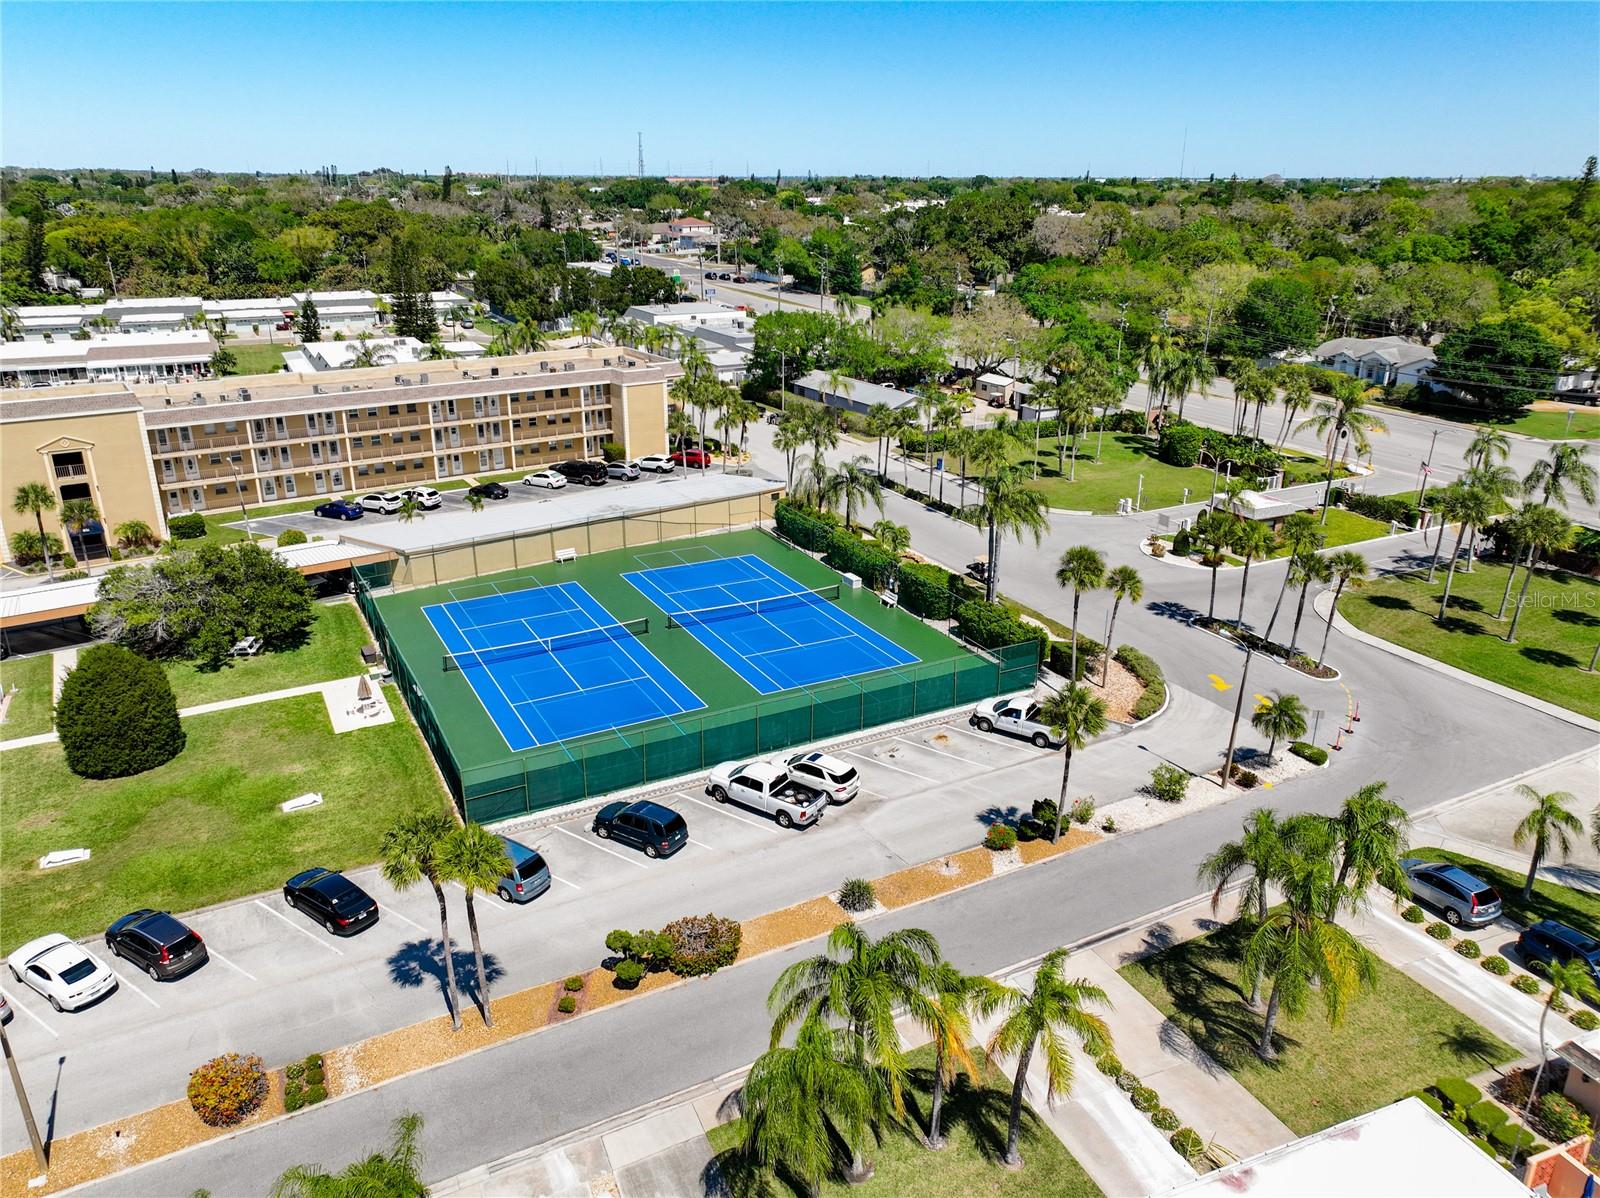 Tennis and Pickleball courts